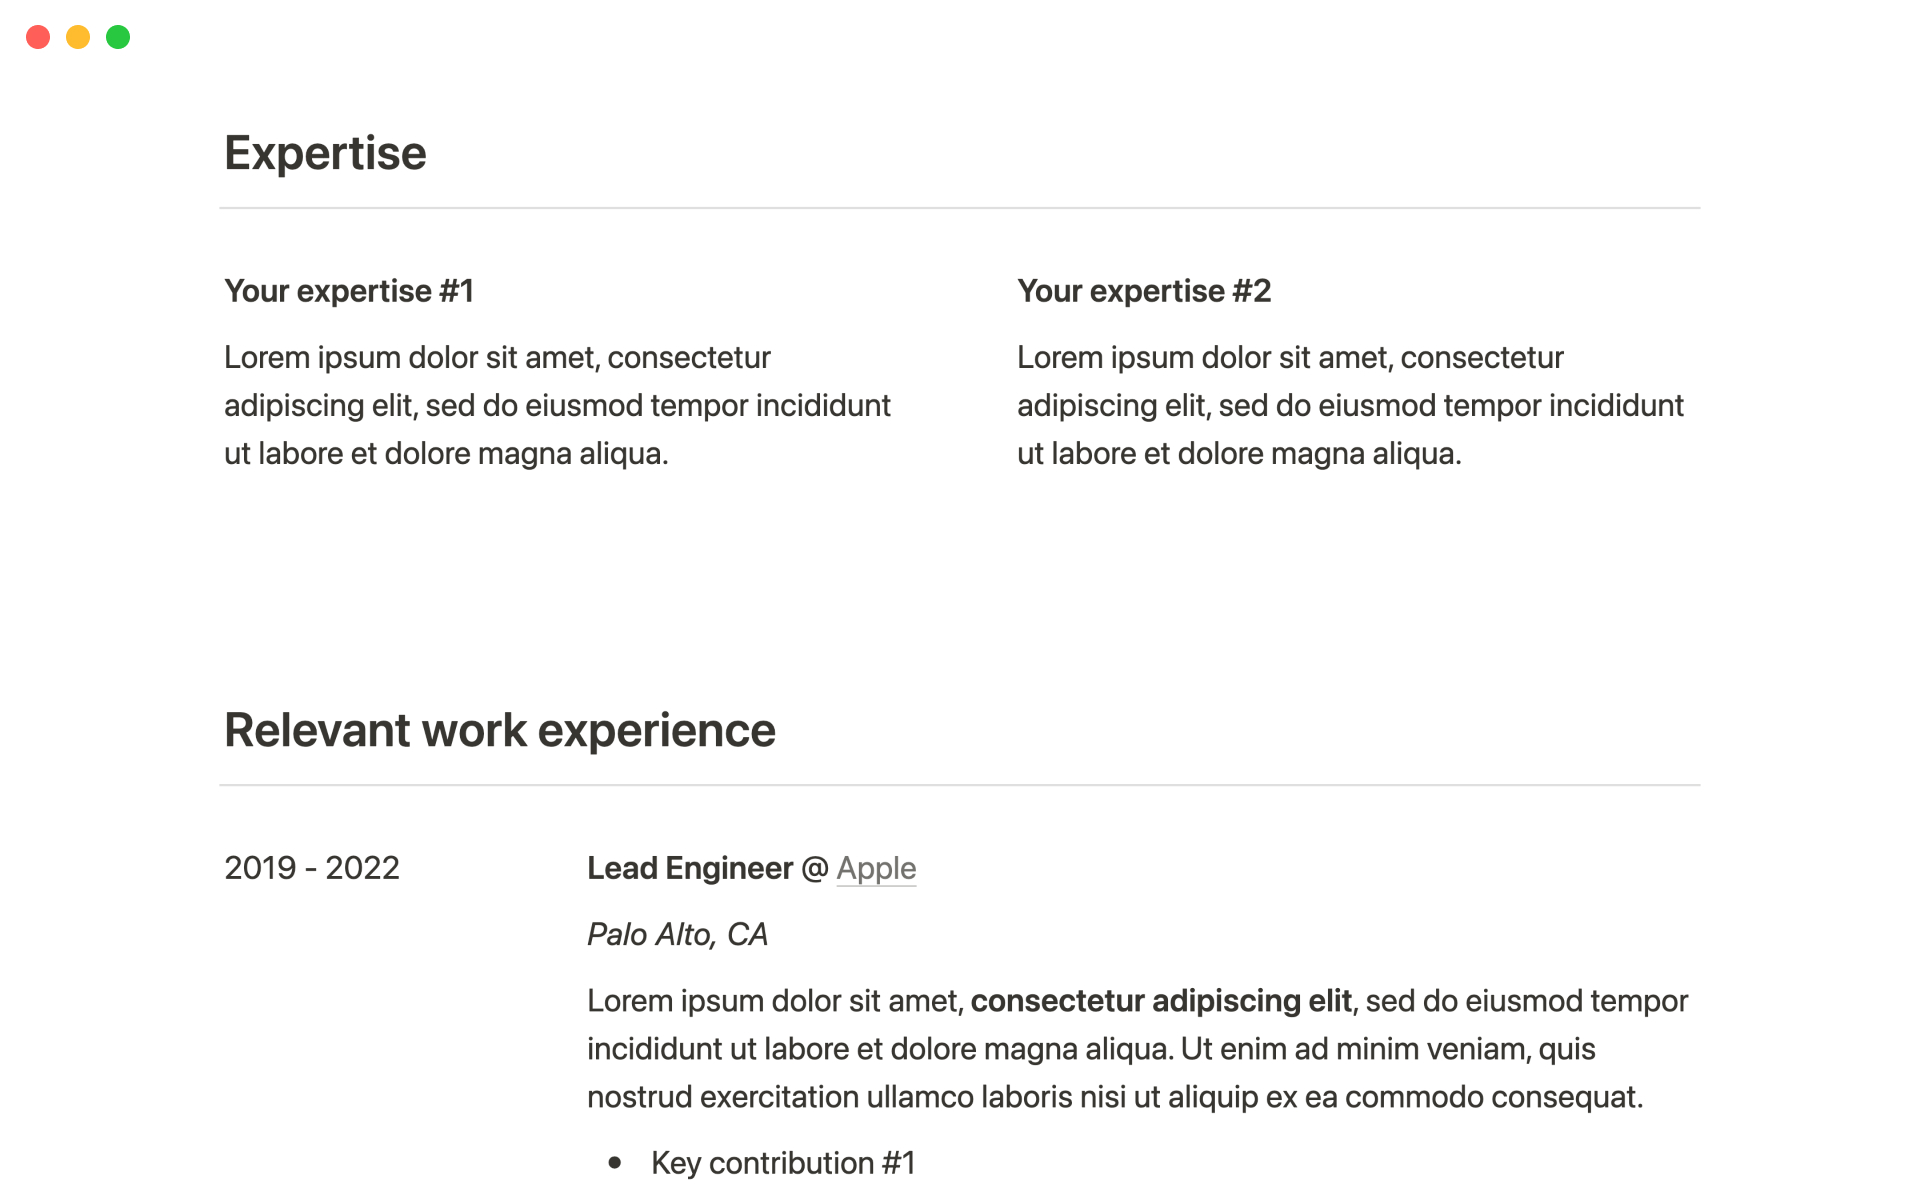 Build a minimalistic, one-page resume website on Notion in minutes without any external tools or services.